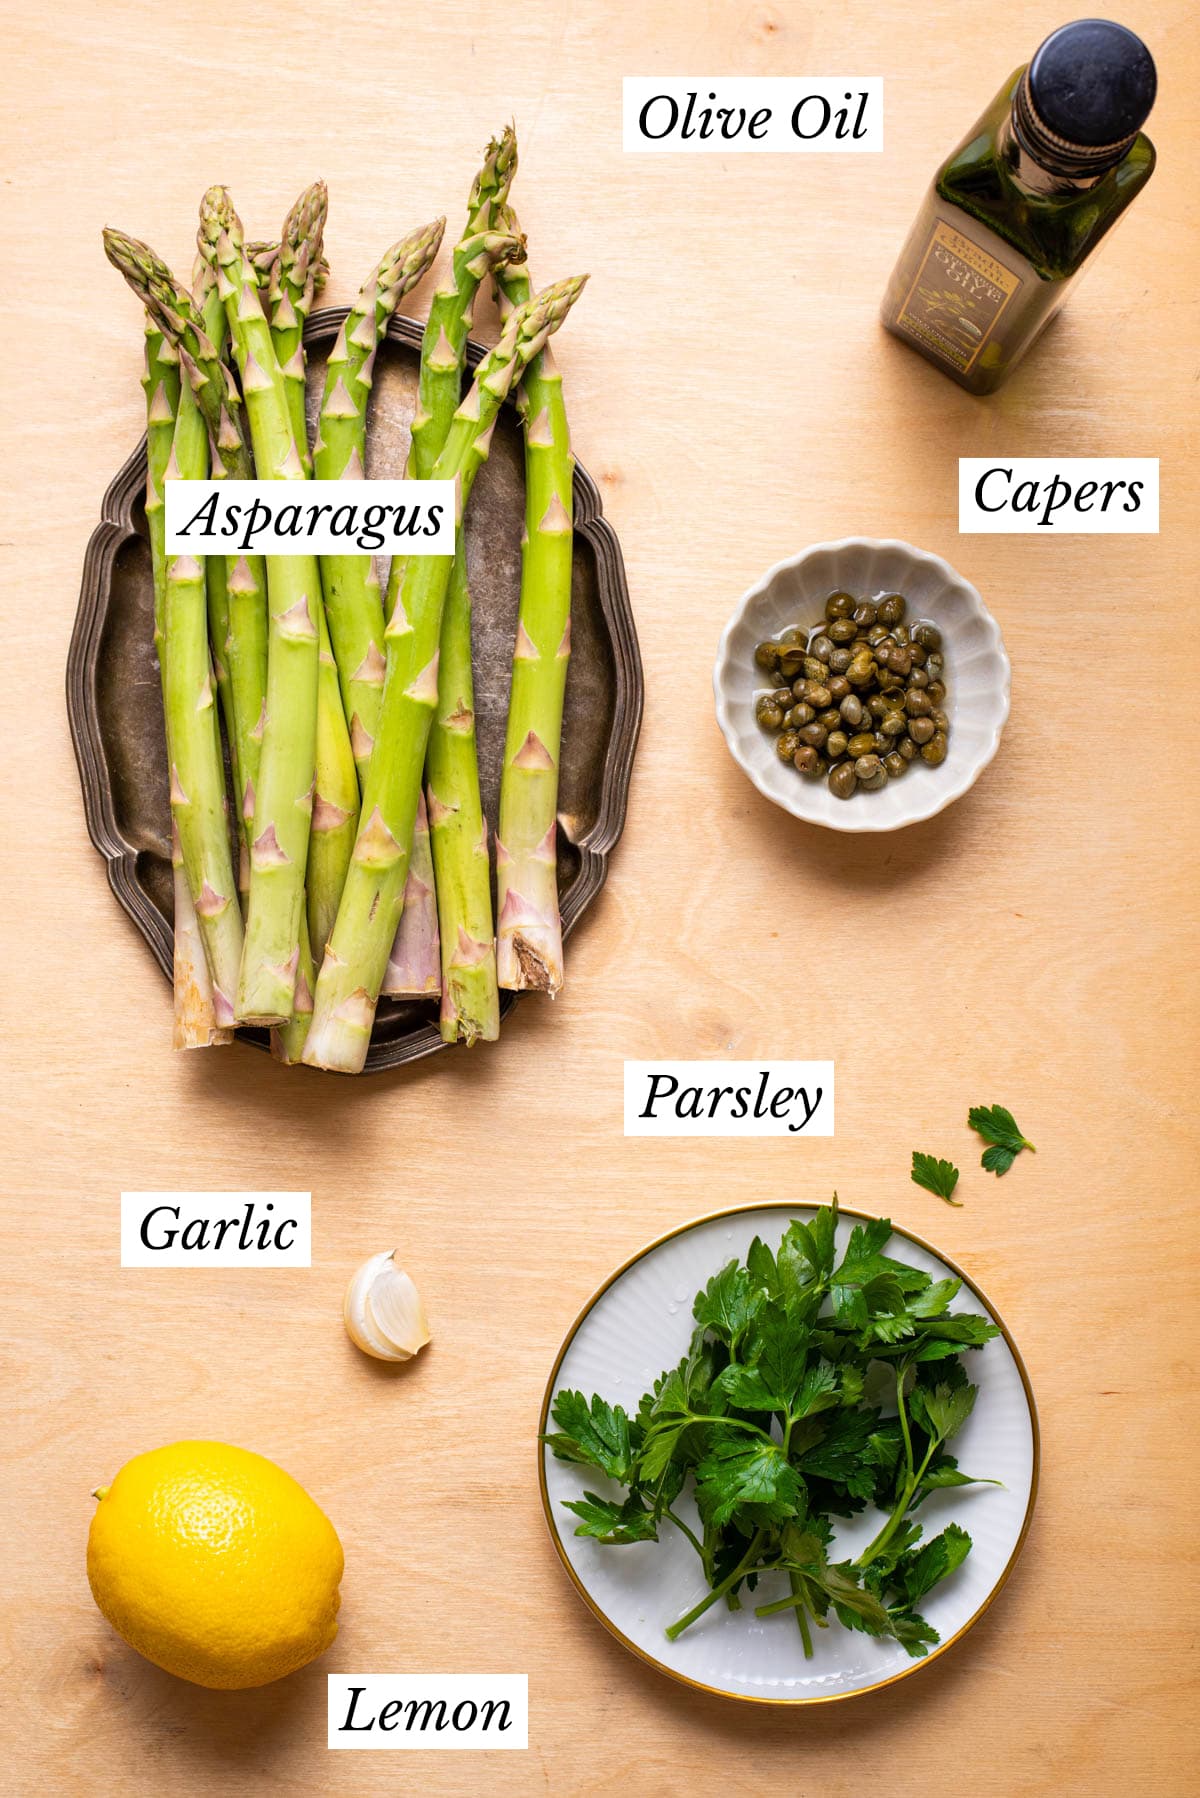 Ingredients gathered to make pan-fried asparagus with lemon and parsley.